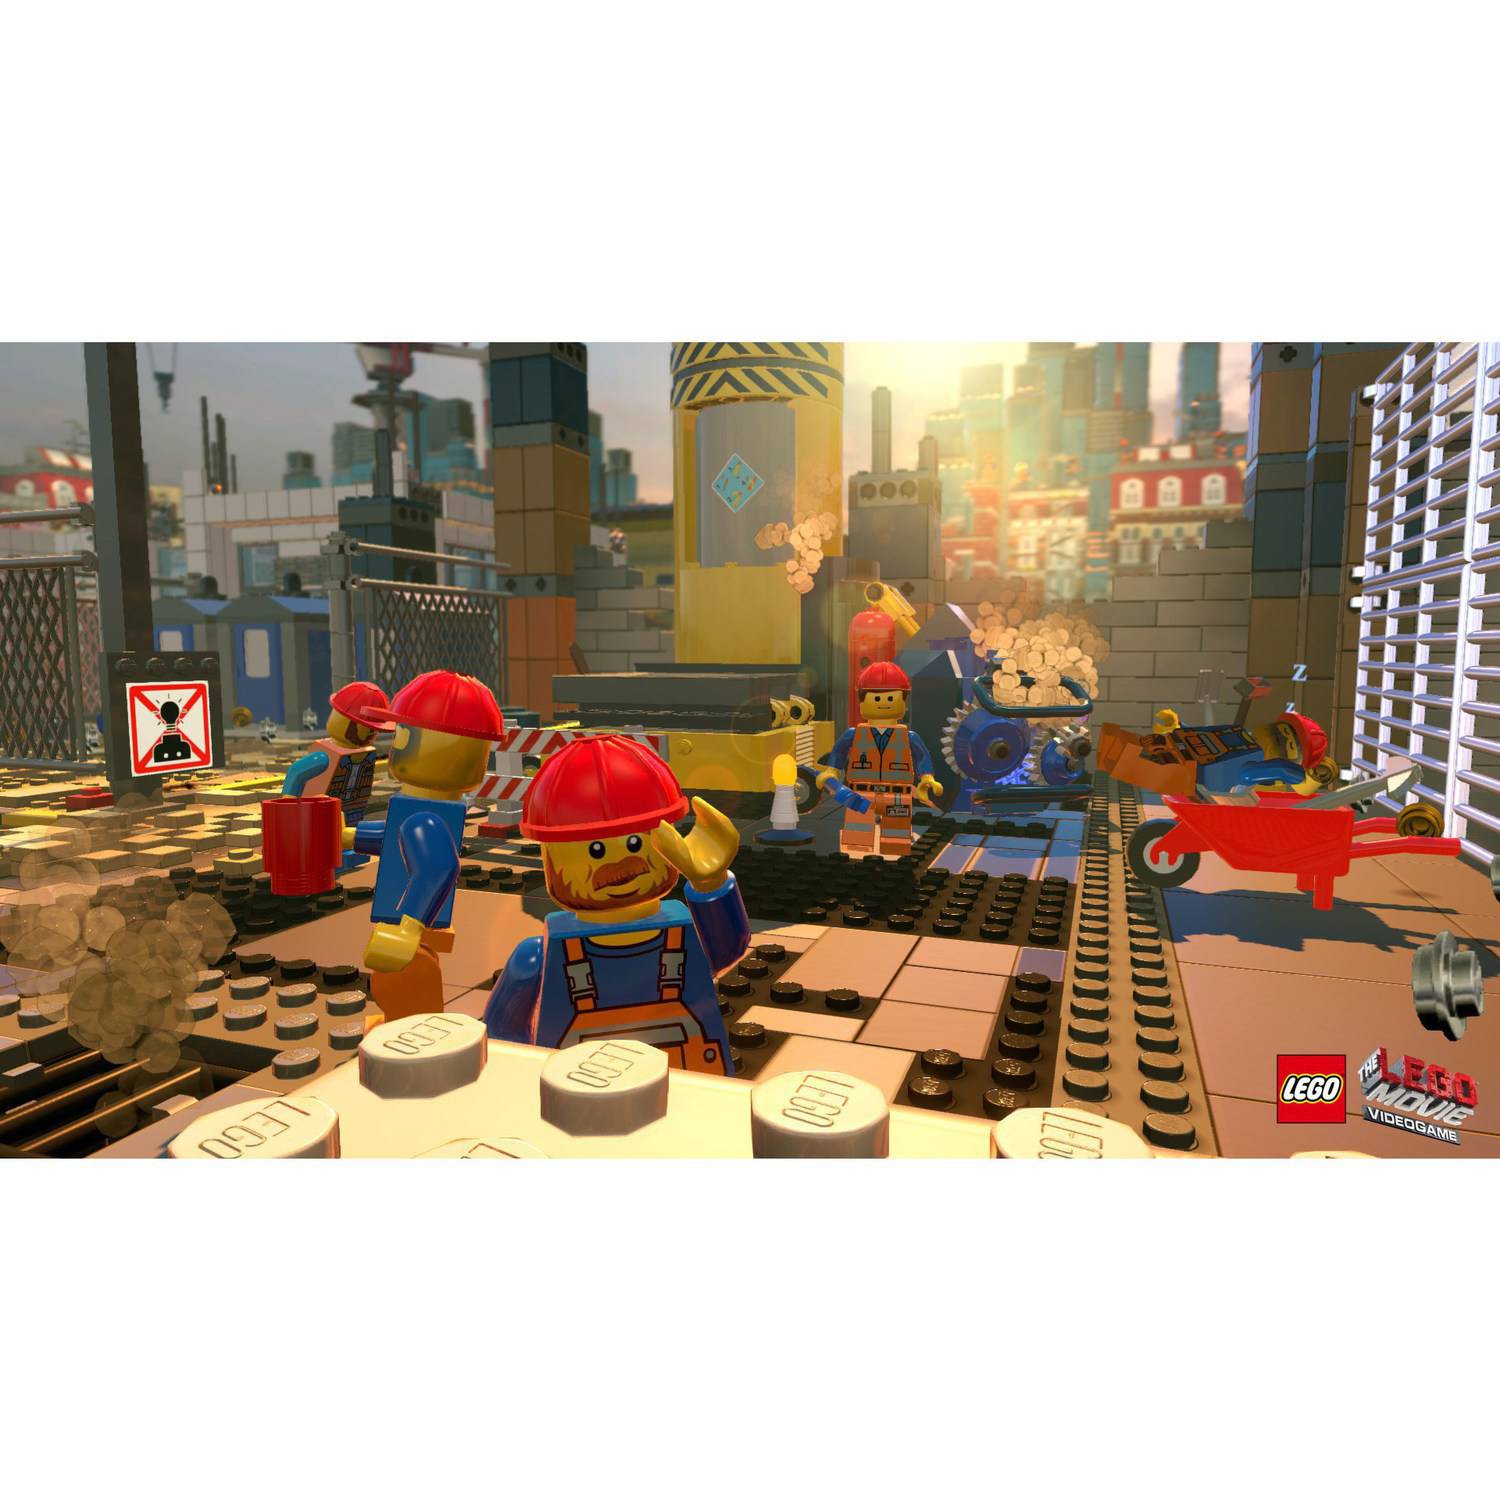 The LEGO Movie Videogame - PlayStation 4 - image 4 of 8